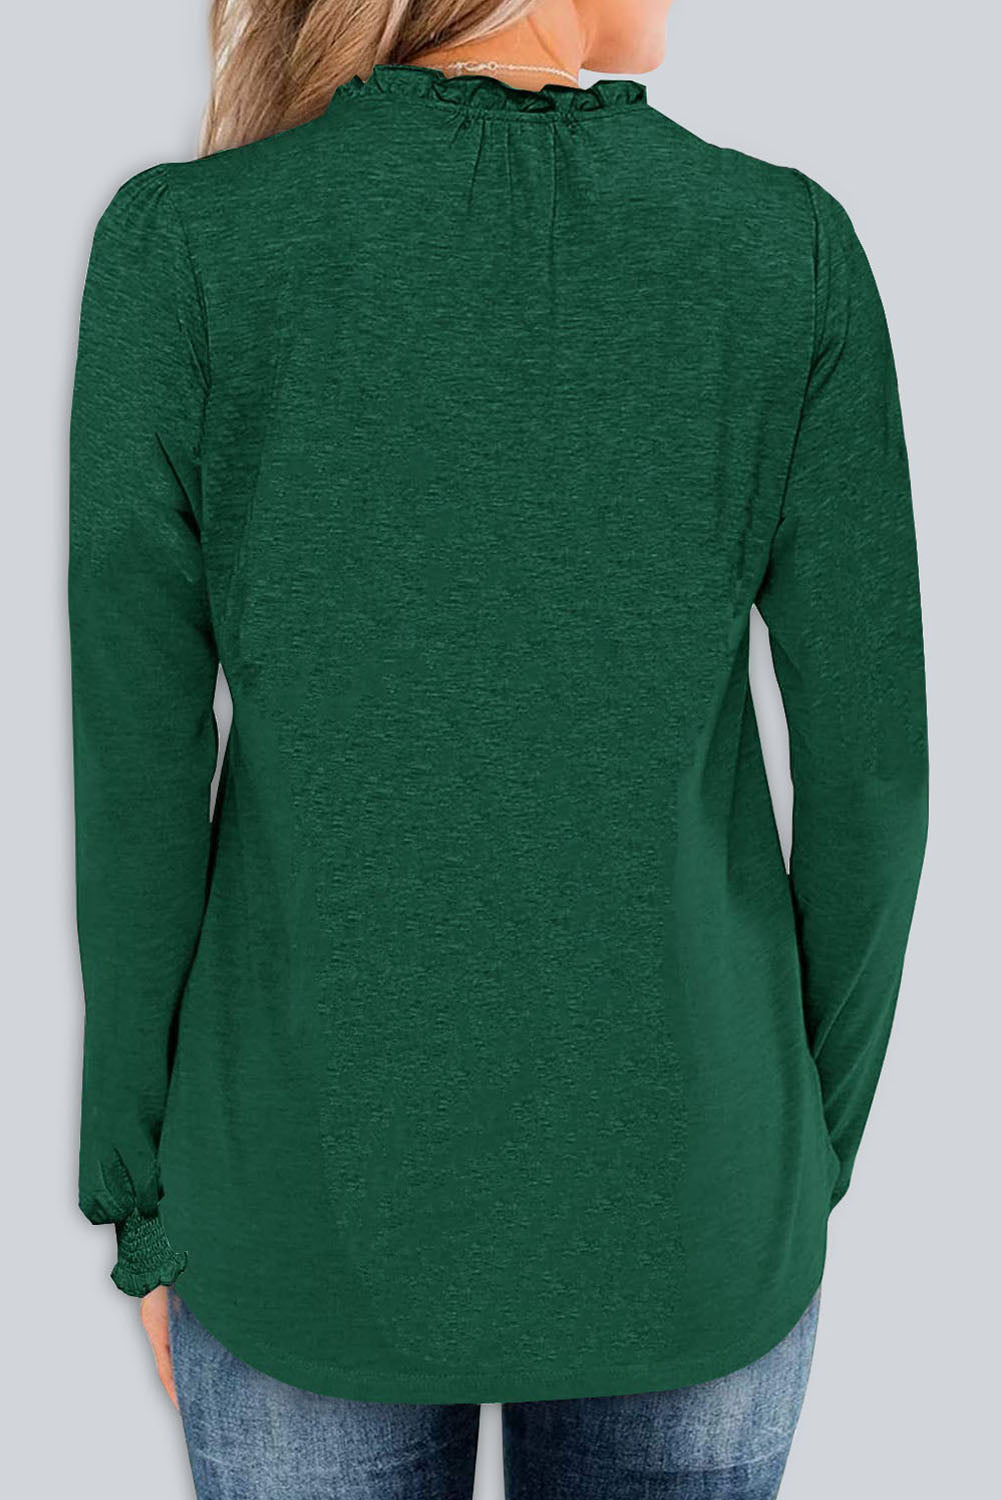 Green Solid Color Notch Neck Basic Long Sleeve Top